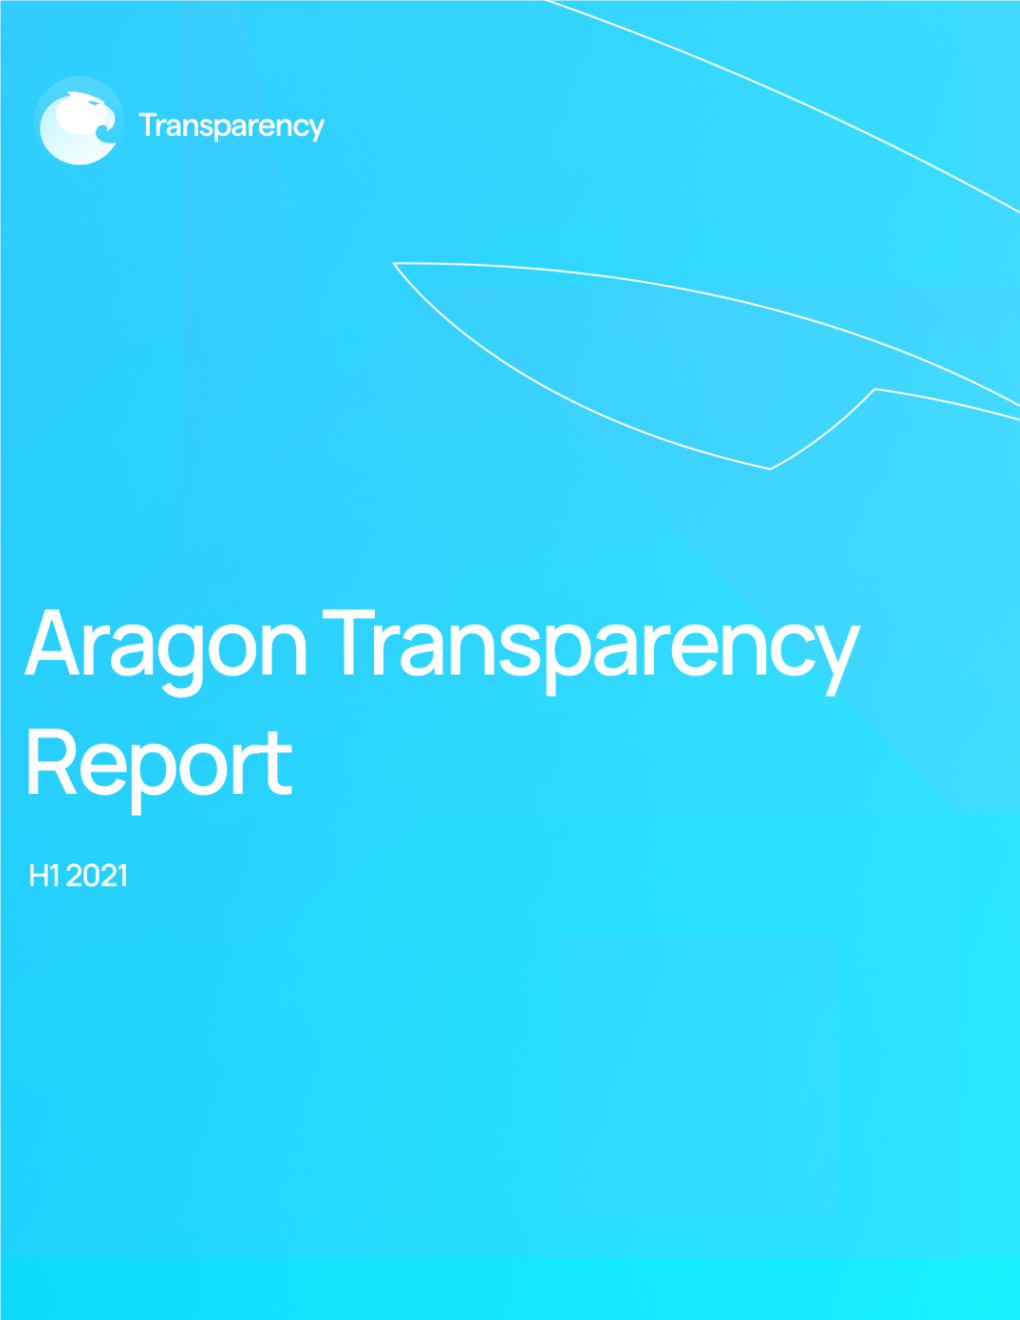 Aragon Transparency Report Is Intended to Consist of a Summary of the Activities of the Aragon Association and Its Afiliated Entities Updated As of 03/06/2021